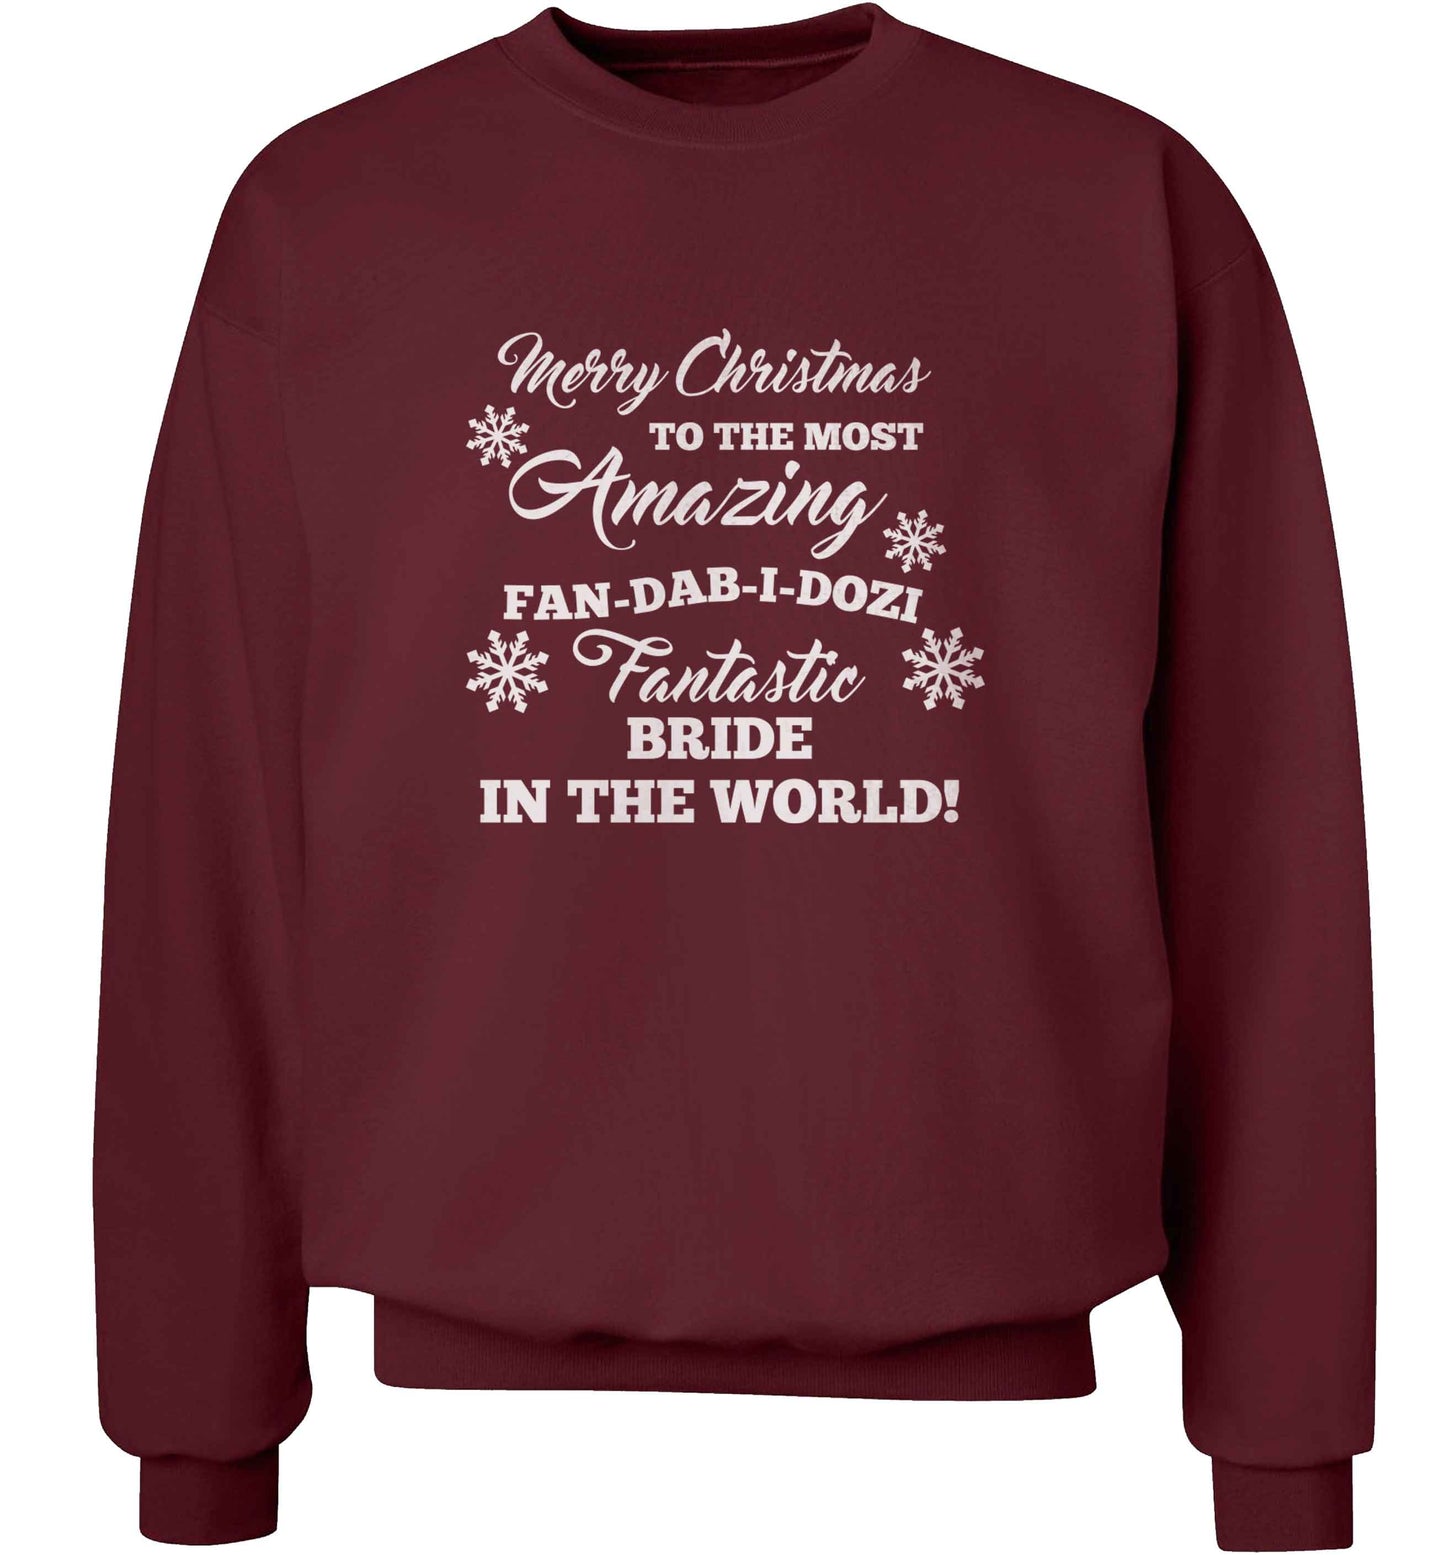 Merry Christmas to the most amazing bride in the world! adult's unisex maroon sweater 2XL